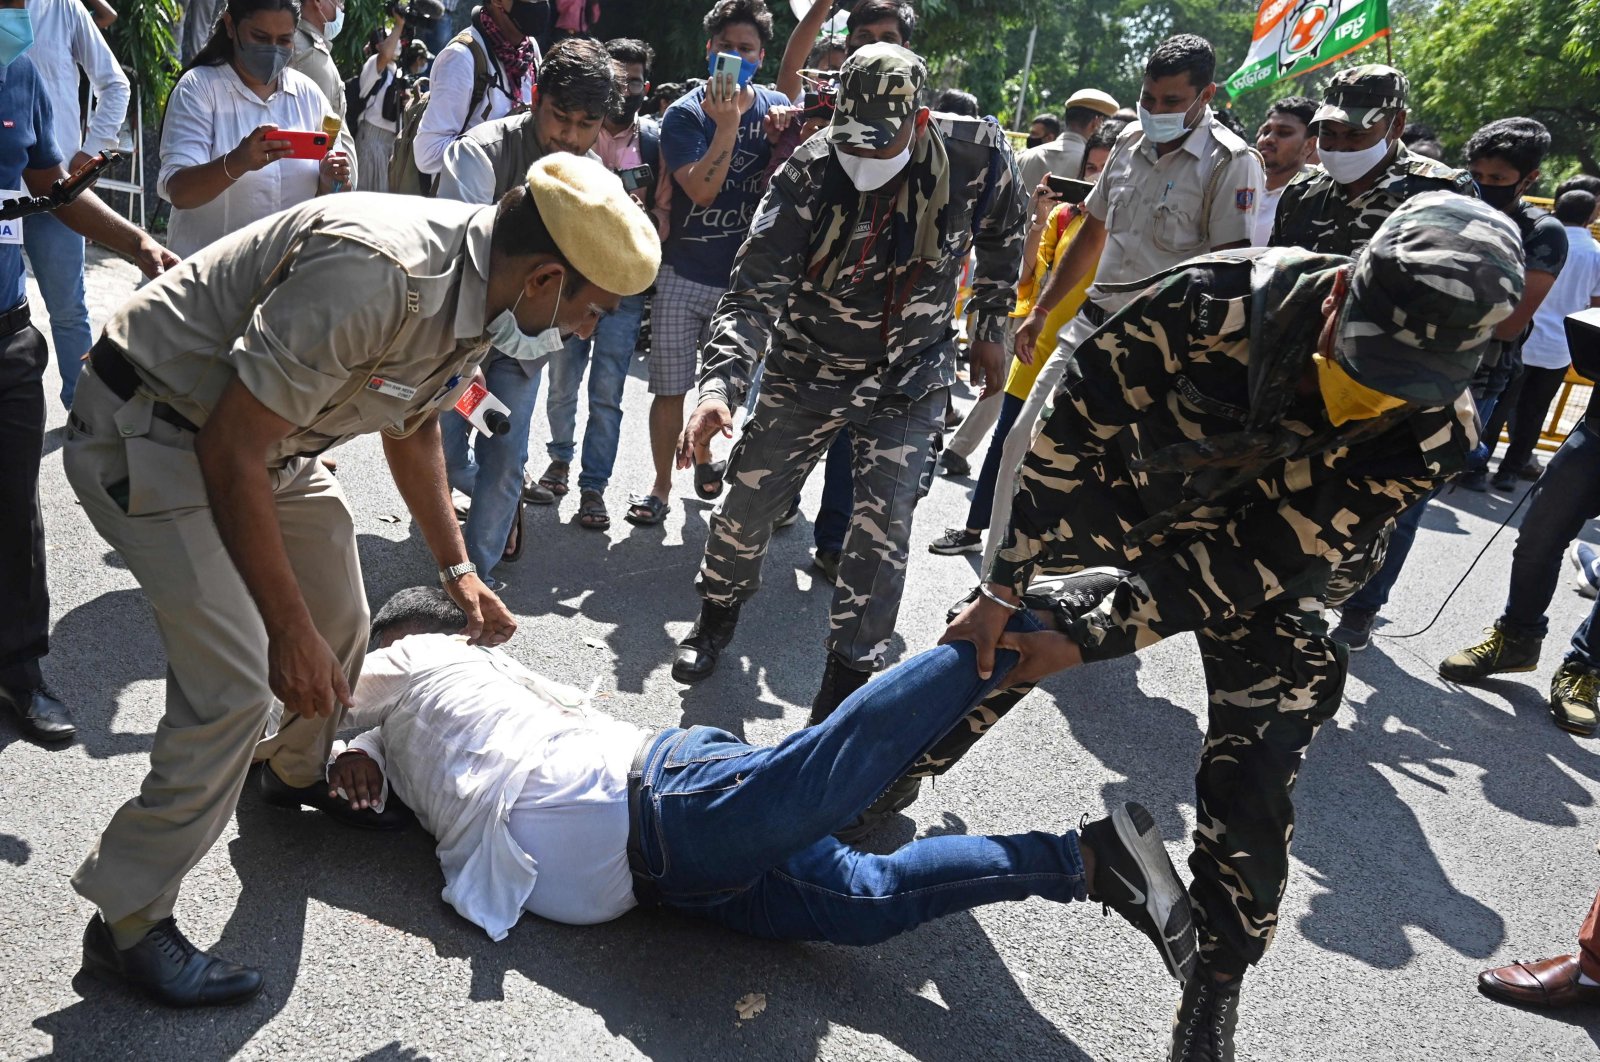 An activist being detained by police during a demonstration a day after clashes involving farmers protesting against agricultural reforms were killed, in New Delhi, India, on Oct. 4, 2021. (AFP Photo)